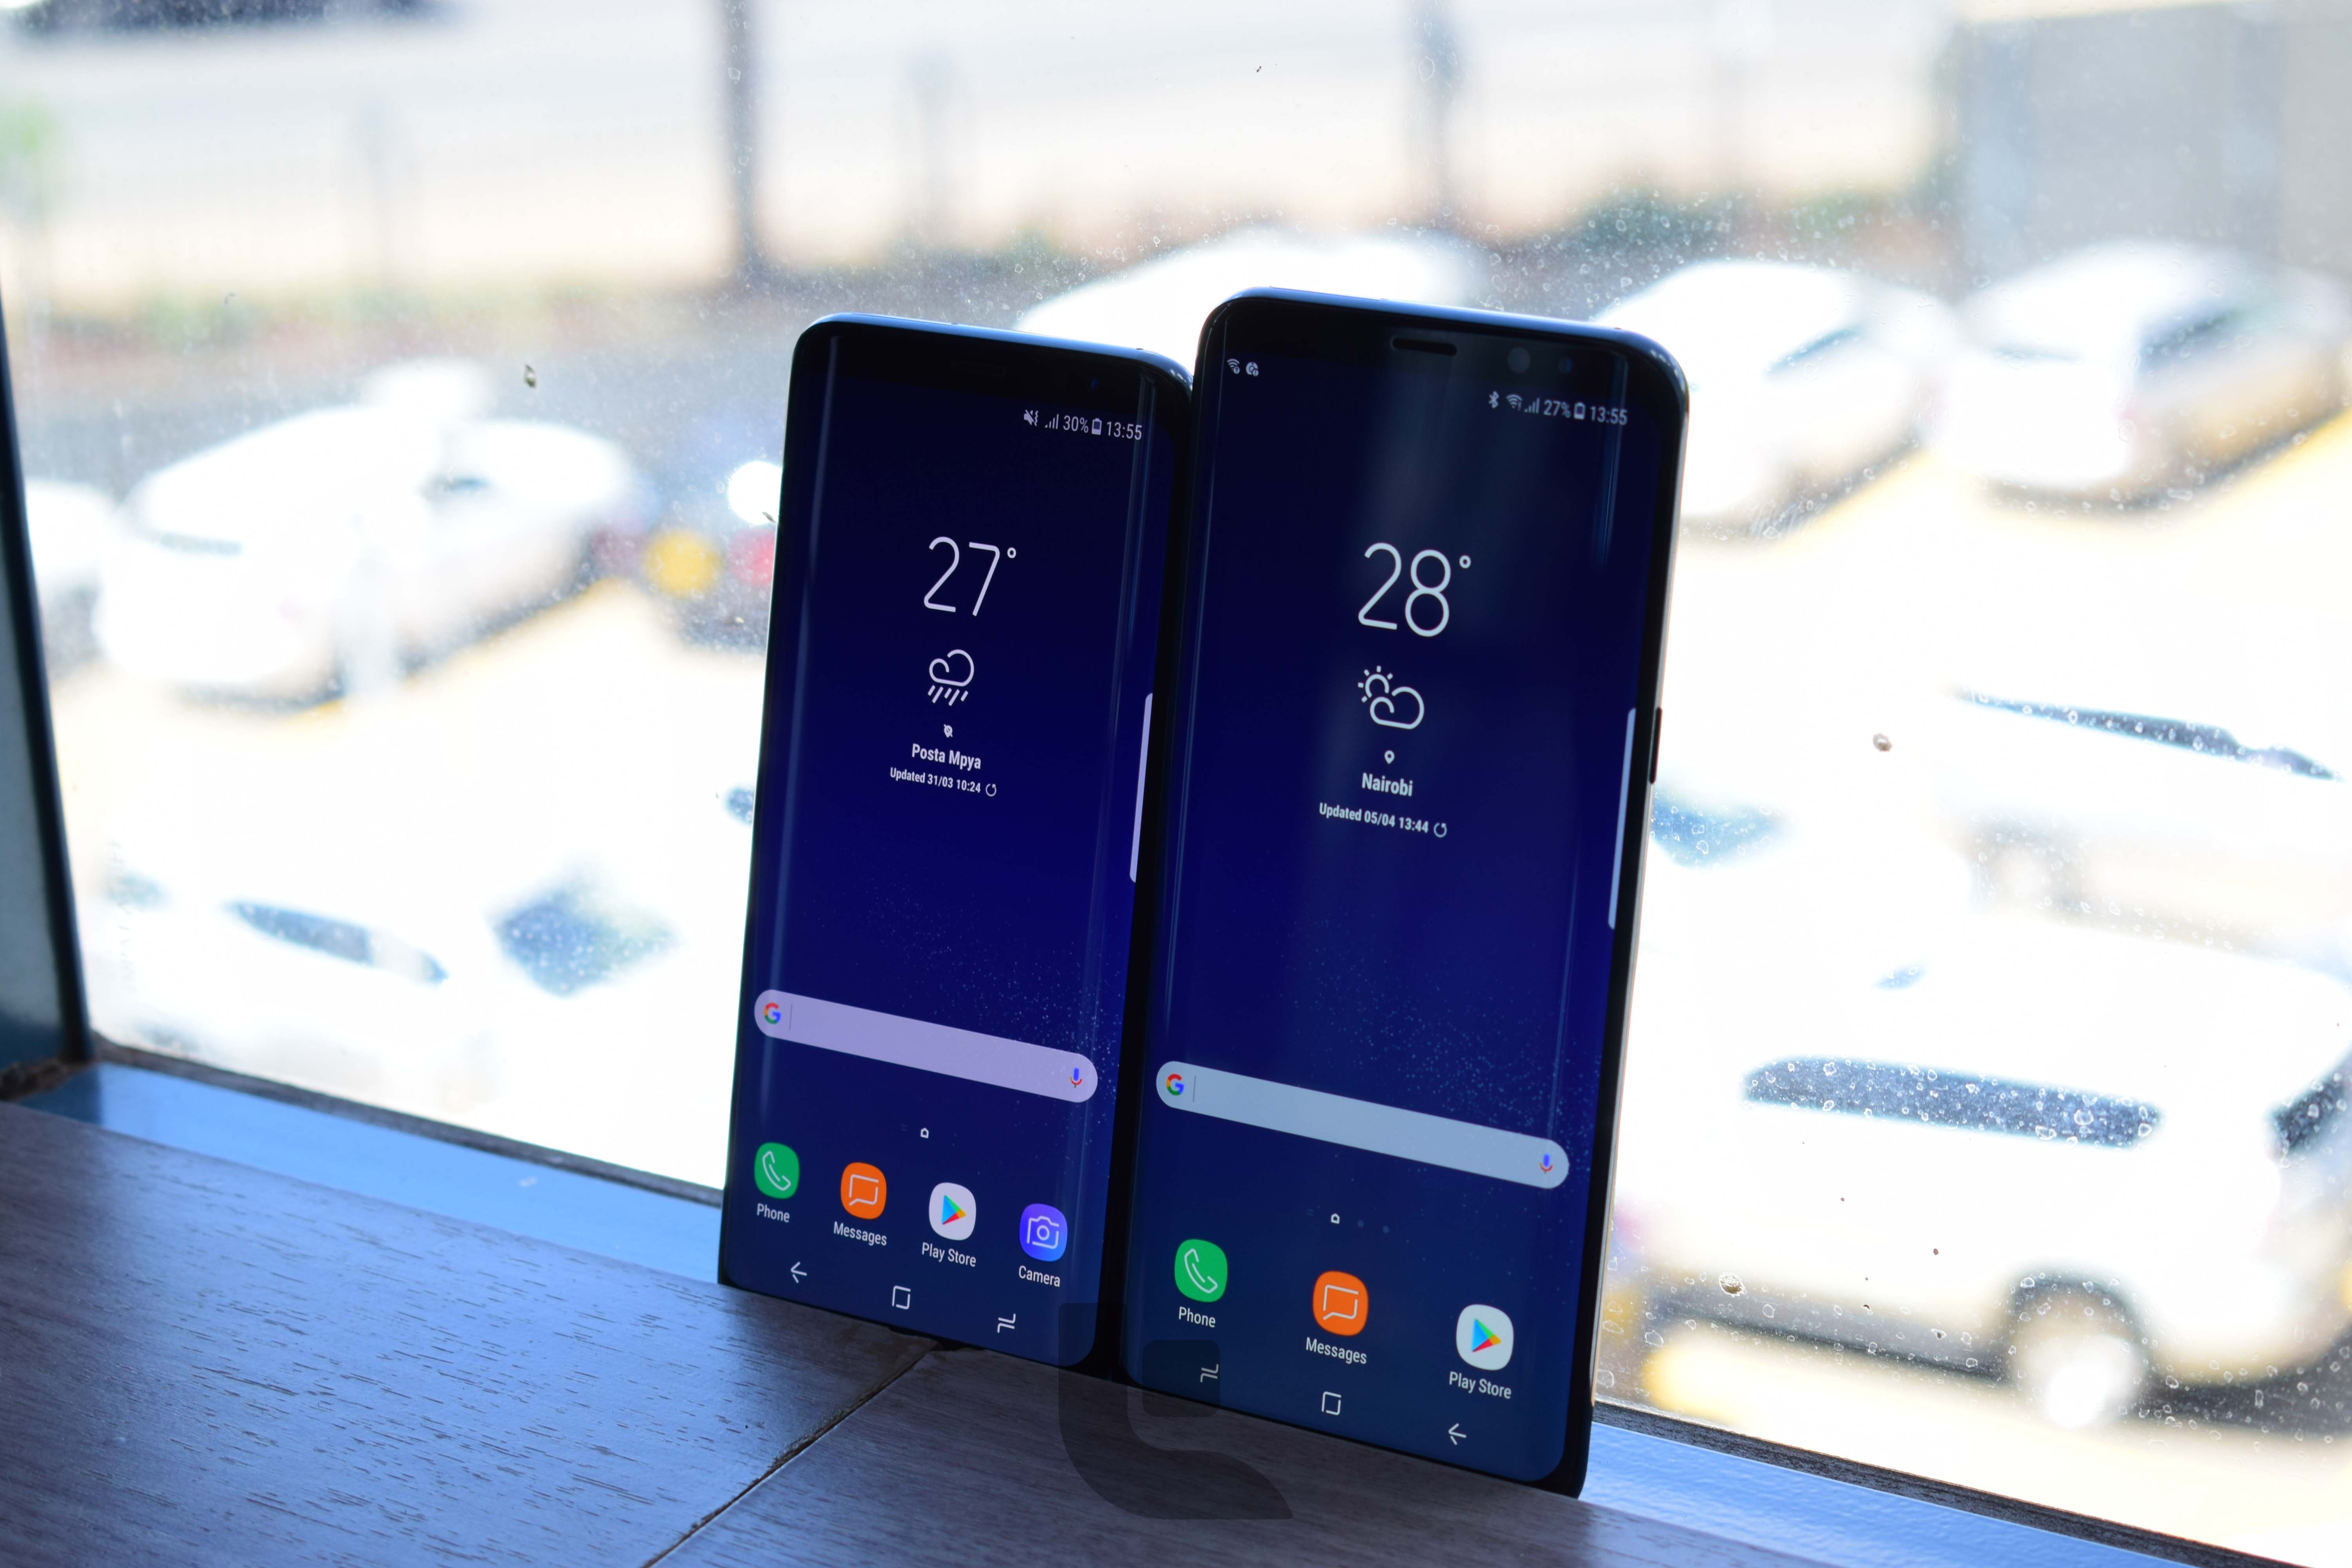 S8 and S8 Plus